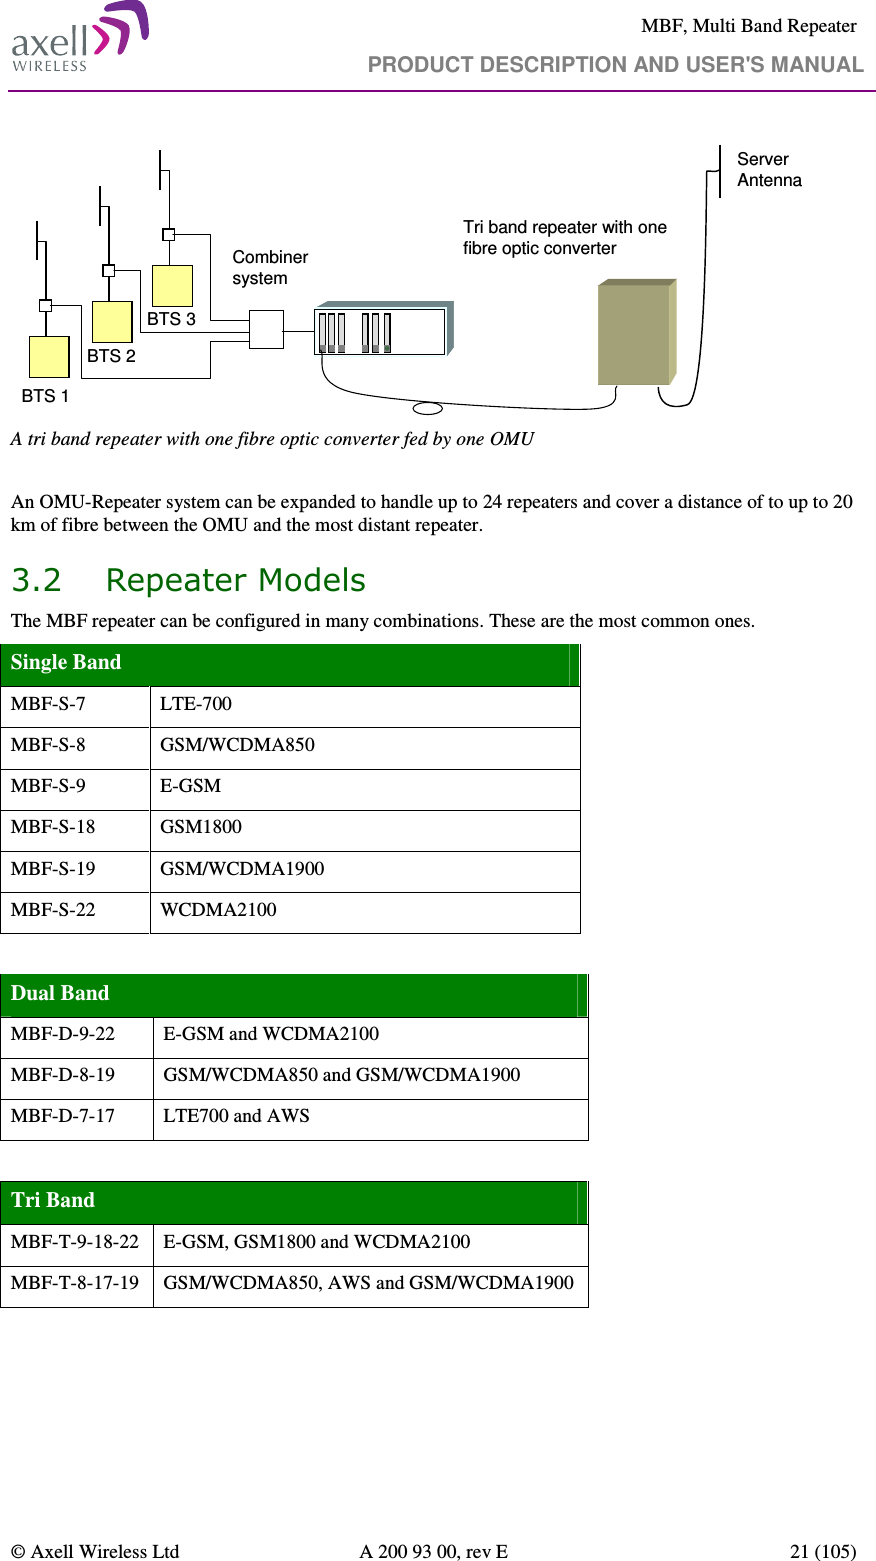     MBF, Multi Band Repeater                                     PRODUCT DESCRIPTION AND USER&apos;S MANUAL   © Axell Wireless Ltd  A 200 93 00, rev E  21 (105)  BTS 1BTS 2BTS 3Tri band repeater with one fibre optic converterServer AntennaCombiner system A tri band repeater with one fibre optic converter fed by one OMU  An OMU-Repeater system can be expanded to handle up to 24 repeaters and cover a distance of to up to 20 km of fibre between the OMU and the most distant repeater.  3.2 Repeater Models The MBF repeater can be configured in many combinations. These are the most common ones. Single Band MBF-S-7  LTE-700 MBF-S-8   GSM/WCDMA850 MBF-S-9  E-GSM MBF-S-18  GSM1800 MBF-S-19  GSM/WCDMA1900 MBF-S-22  WCDMA2100  Dual Band MBF-D-9-22  E-GSM and WCDMA2100 MBF-D-8-19  GSM/WCDMA850 and GSM/WCDMA1900 MBF-D-7-17  LTE700 and AWS  Tri Band MBF-T-9-18-22  E-GSM, GSM1800 and WCDMA2100 MBF-T-8-17-19  GSM/WCDMA850, AWS and GSM/WCDMA1900  